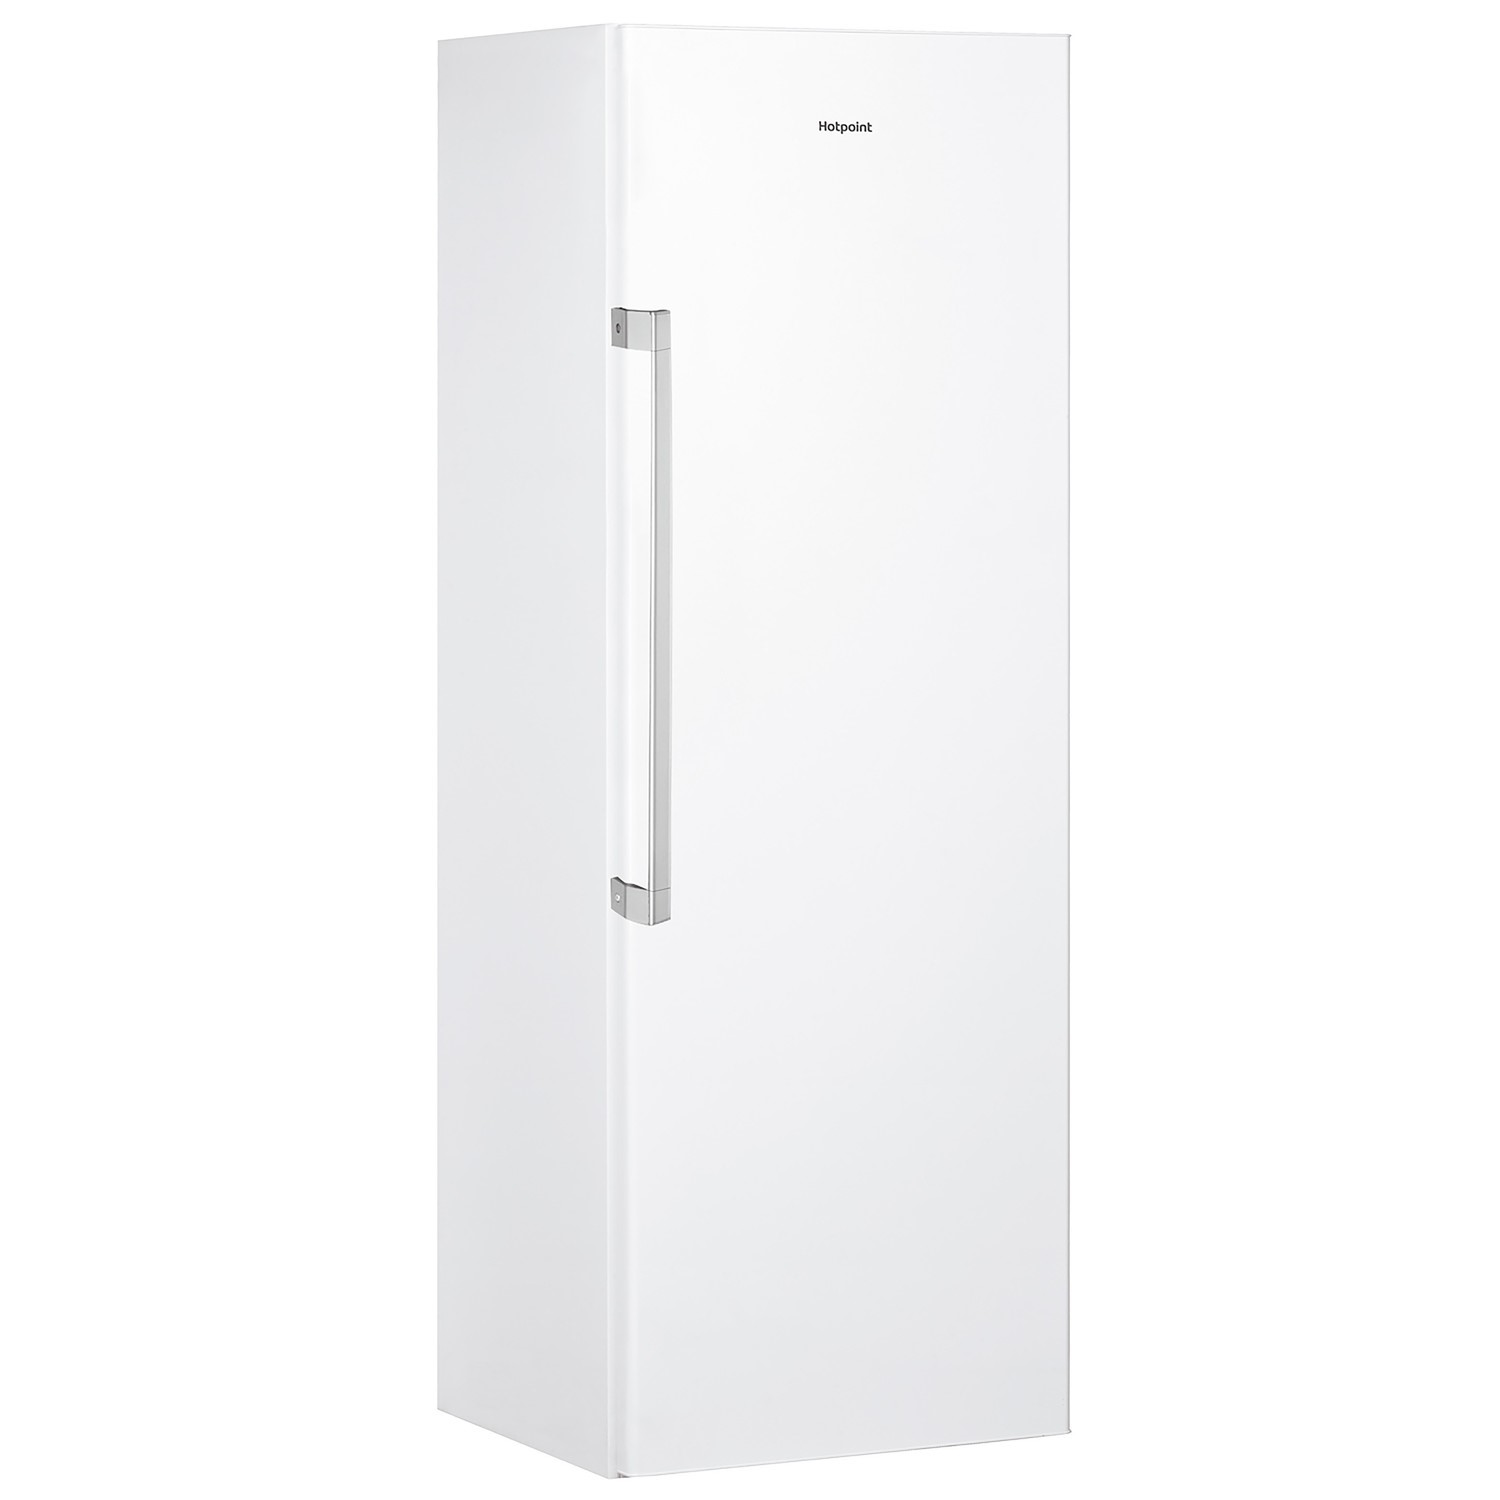 Photos - Other for Computer Hotpoint-Ariston HOTPOINT Day 363 Litre Freestanding Fridge - White SH81QWRFDUK1 